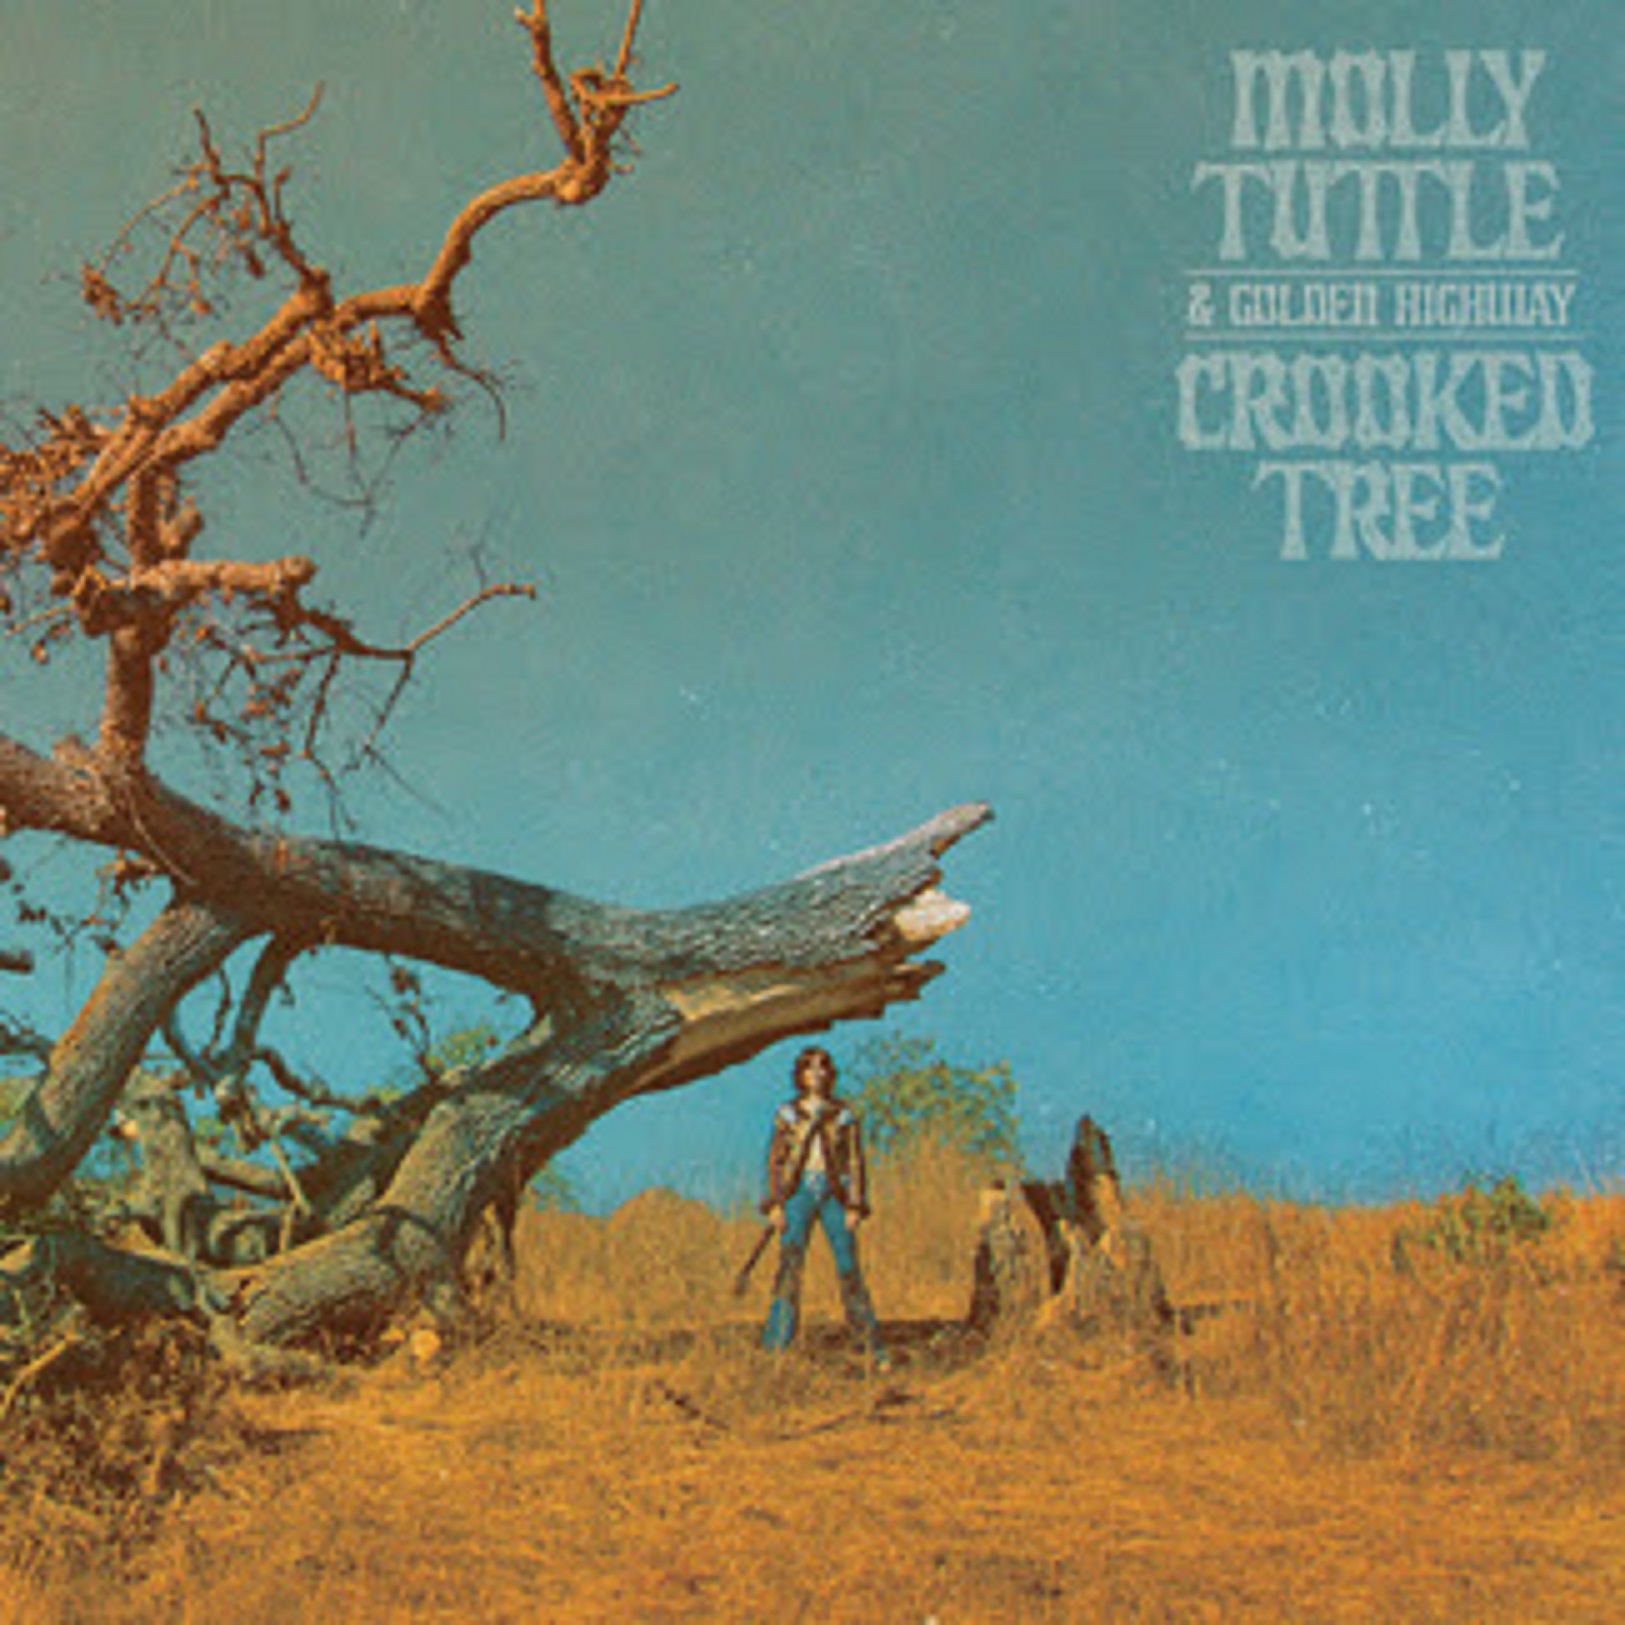 New deluxe version of Molly Tuttle’s GRAMMY-nominated album "Crooked Tree" out today